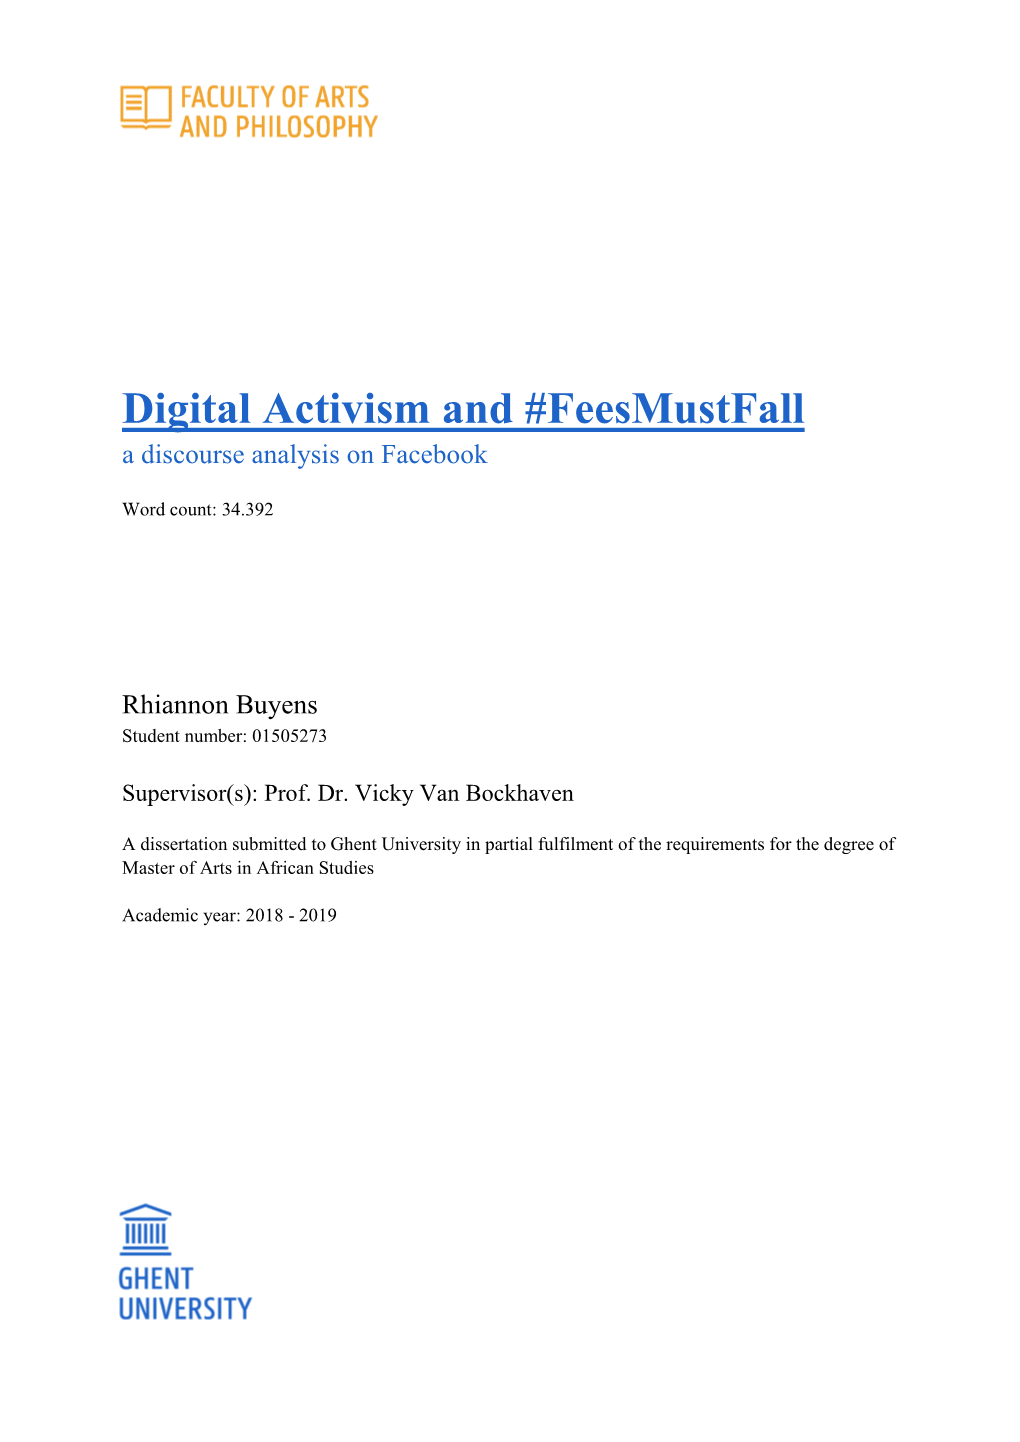 Digital Activism and #Feesmustfall a Discourse Analysis on Facebook